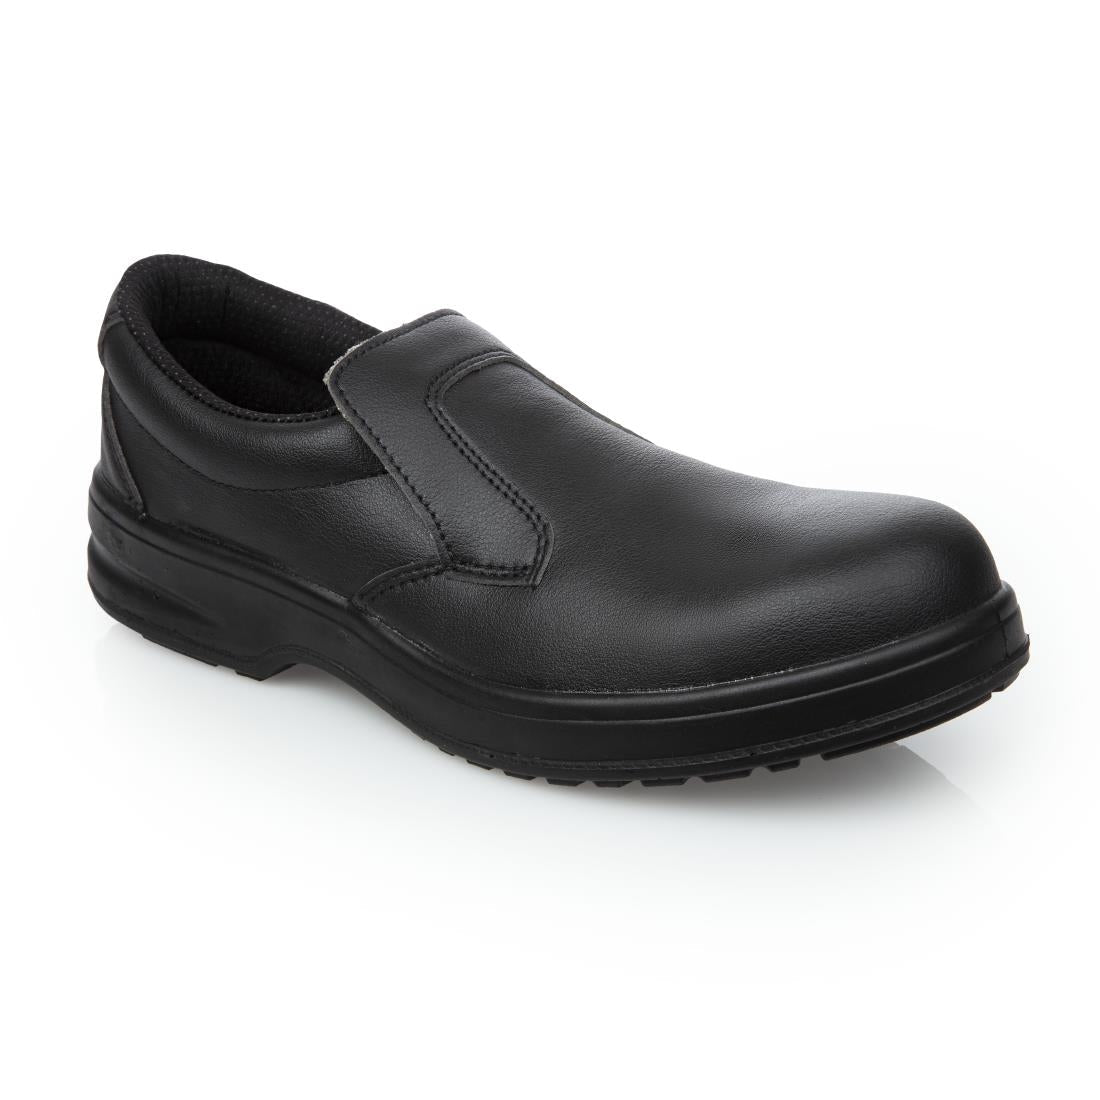 A845-44 Slipbuster Lite Slip On Safety Shoes Black 44 JD Catering Equipment Solutions Ltd